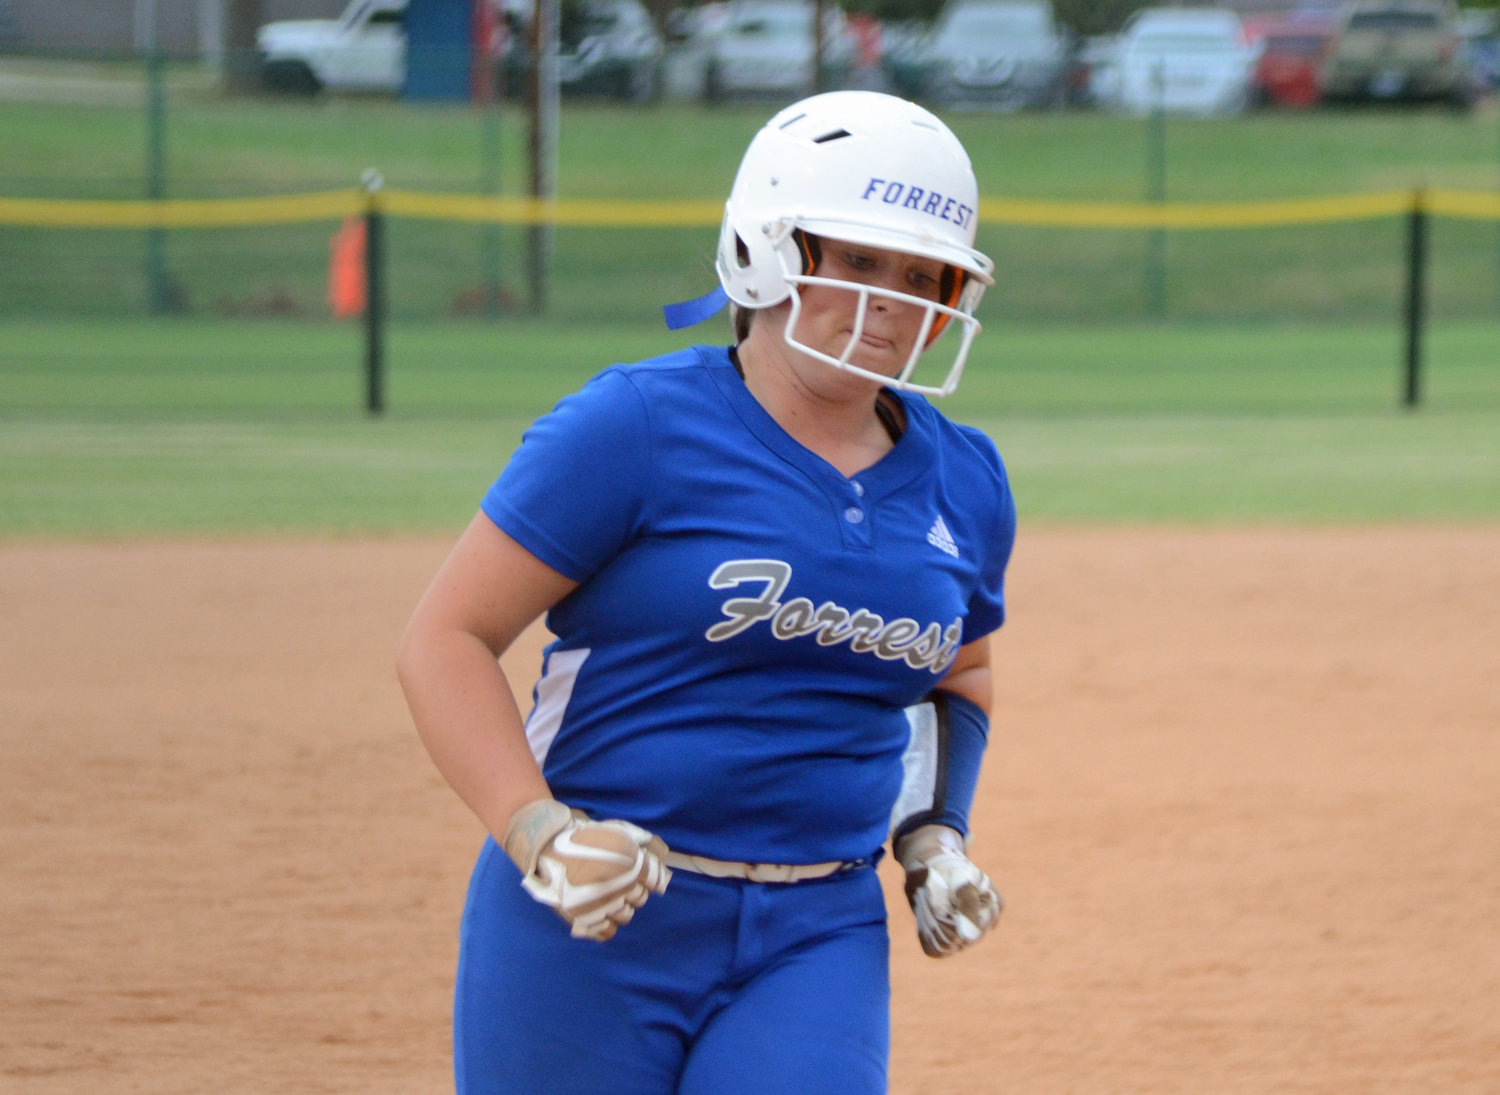 Forrest junior Carli Warner is in her homerun trot after belting the game tying two-run bomb in the fourth inning versus Meigs County in the first round win at Spring Fling XIX at Murfreesboro Tuesday night.